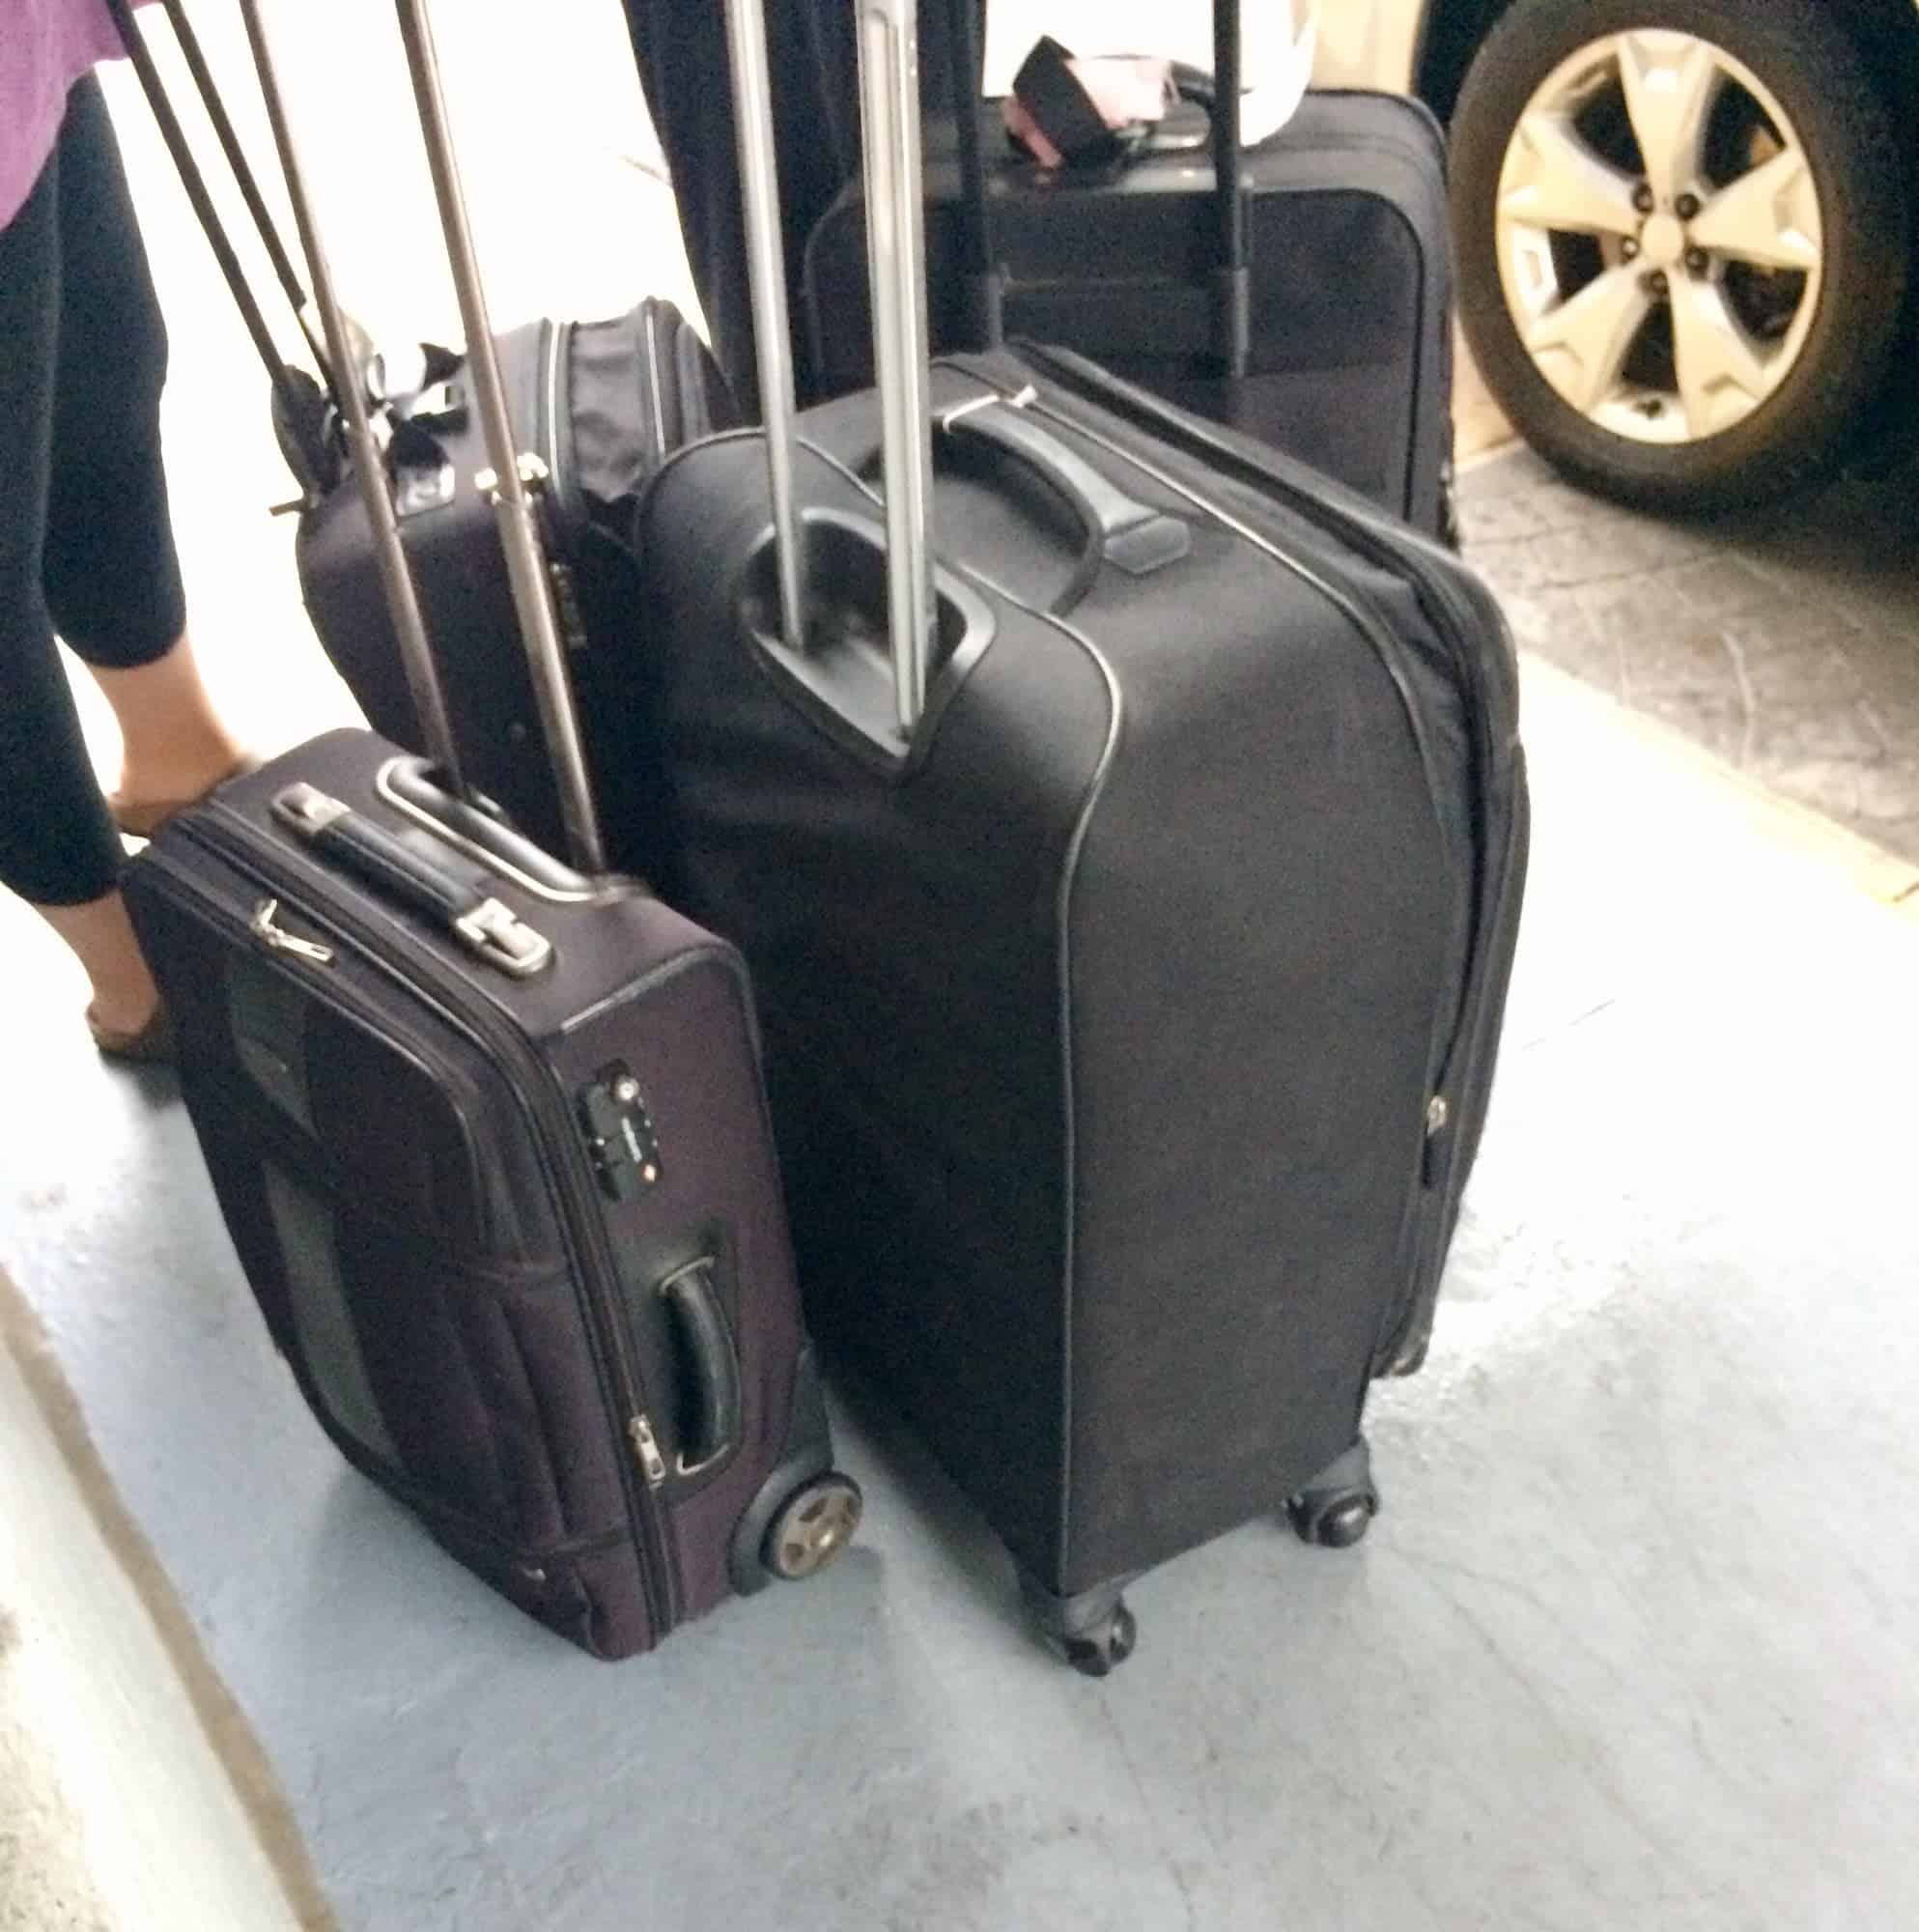 People traveling with their luggage arriving to the airport.